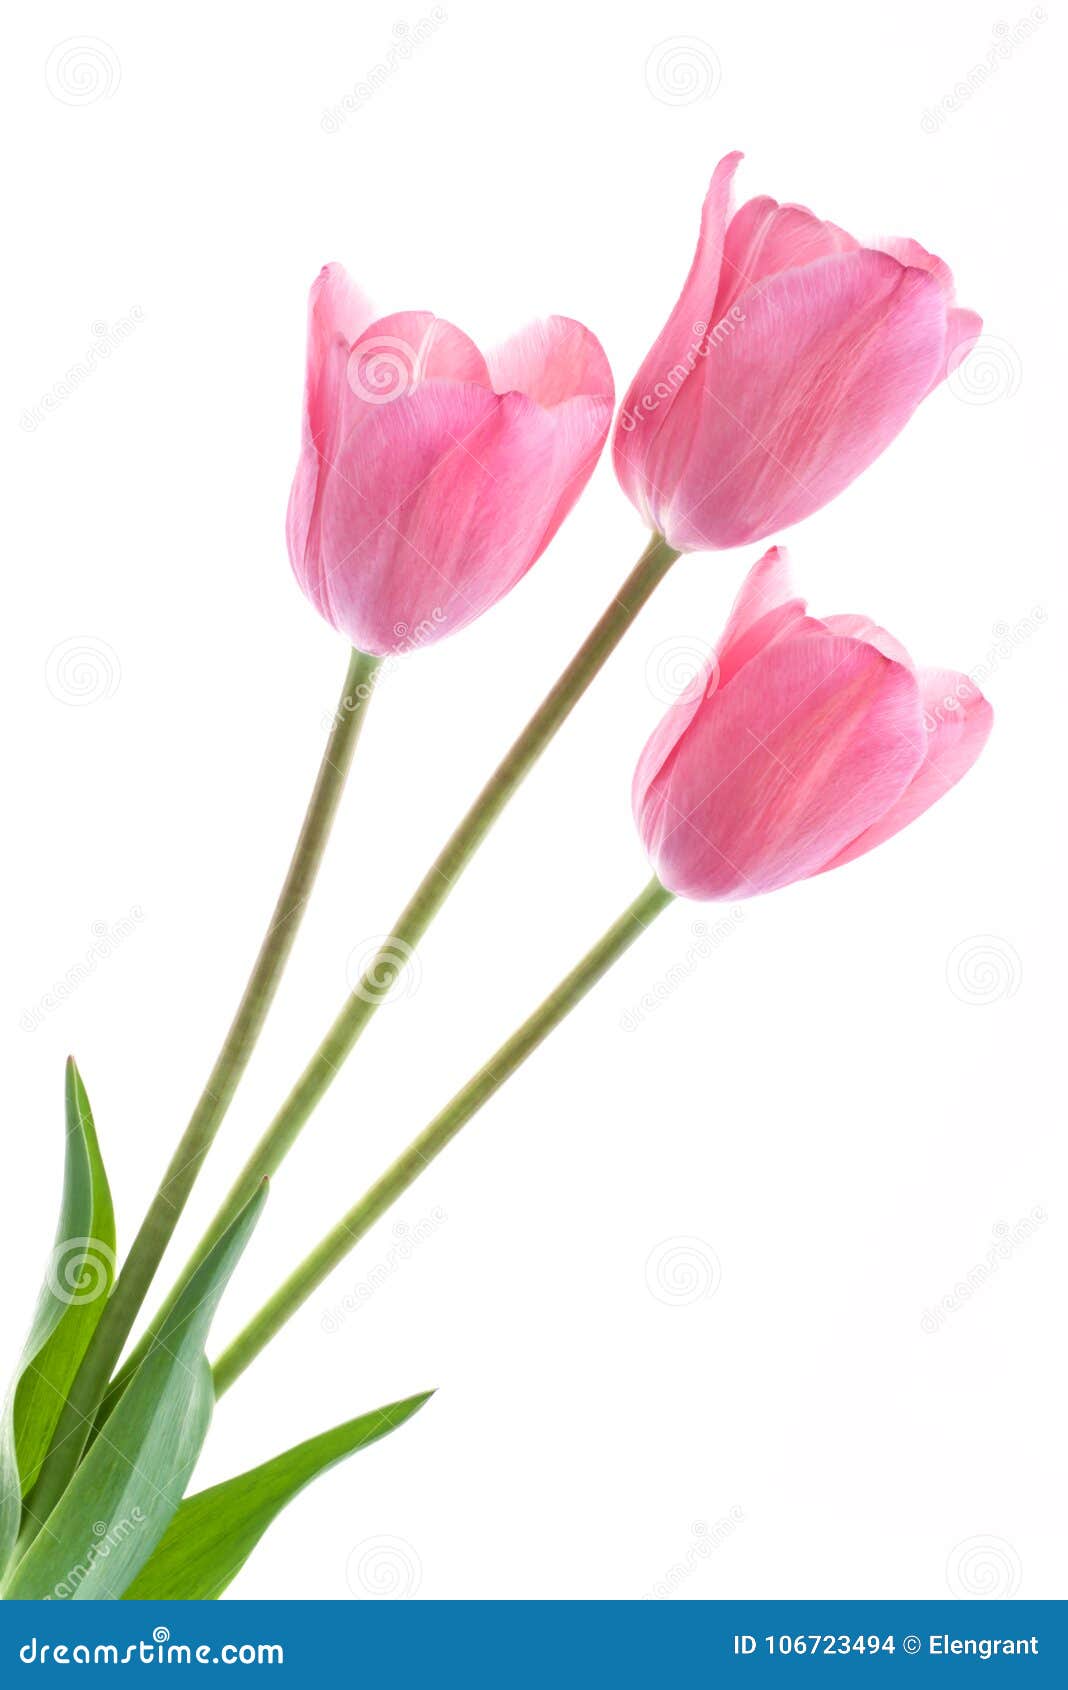 Pale Pink Tulips Isolated on White Background Stock Photo - Image of ...